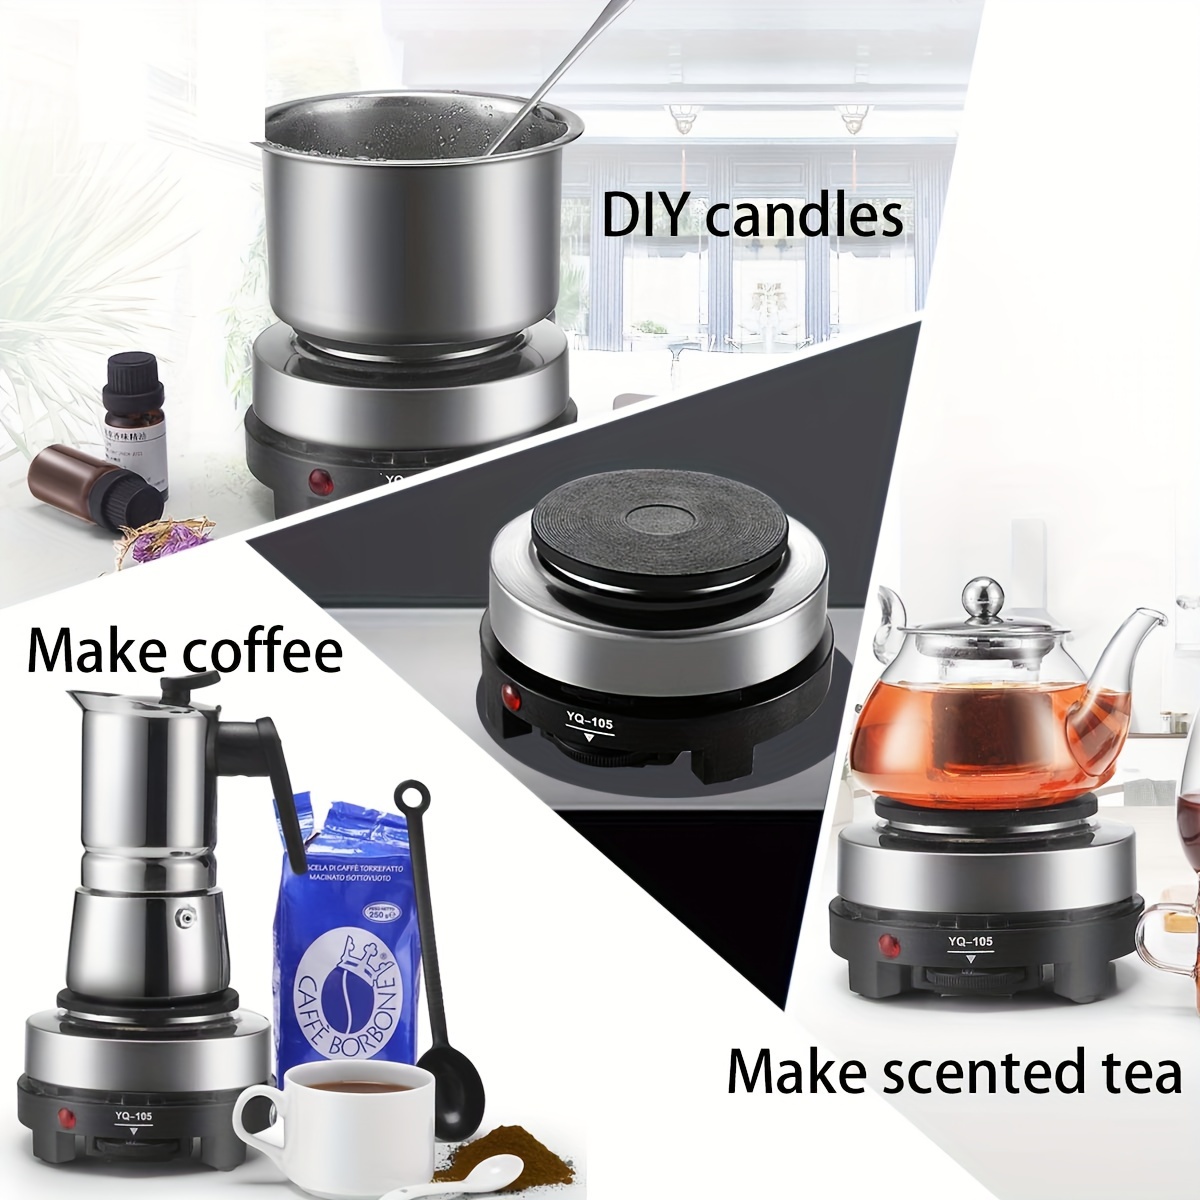 Pjtewawe cooking utensils multifunctional diy lipstick heating furnace  coffee stove tea boiling electric stove household adjustable temperature  experimental small electric stove 